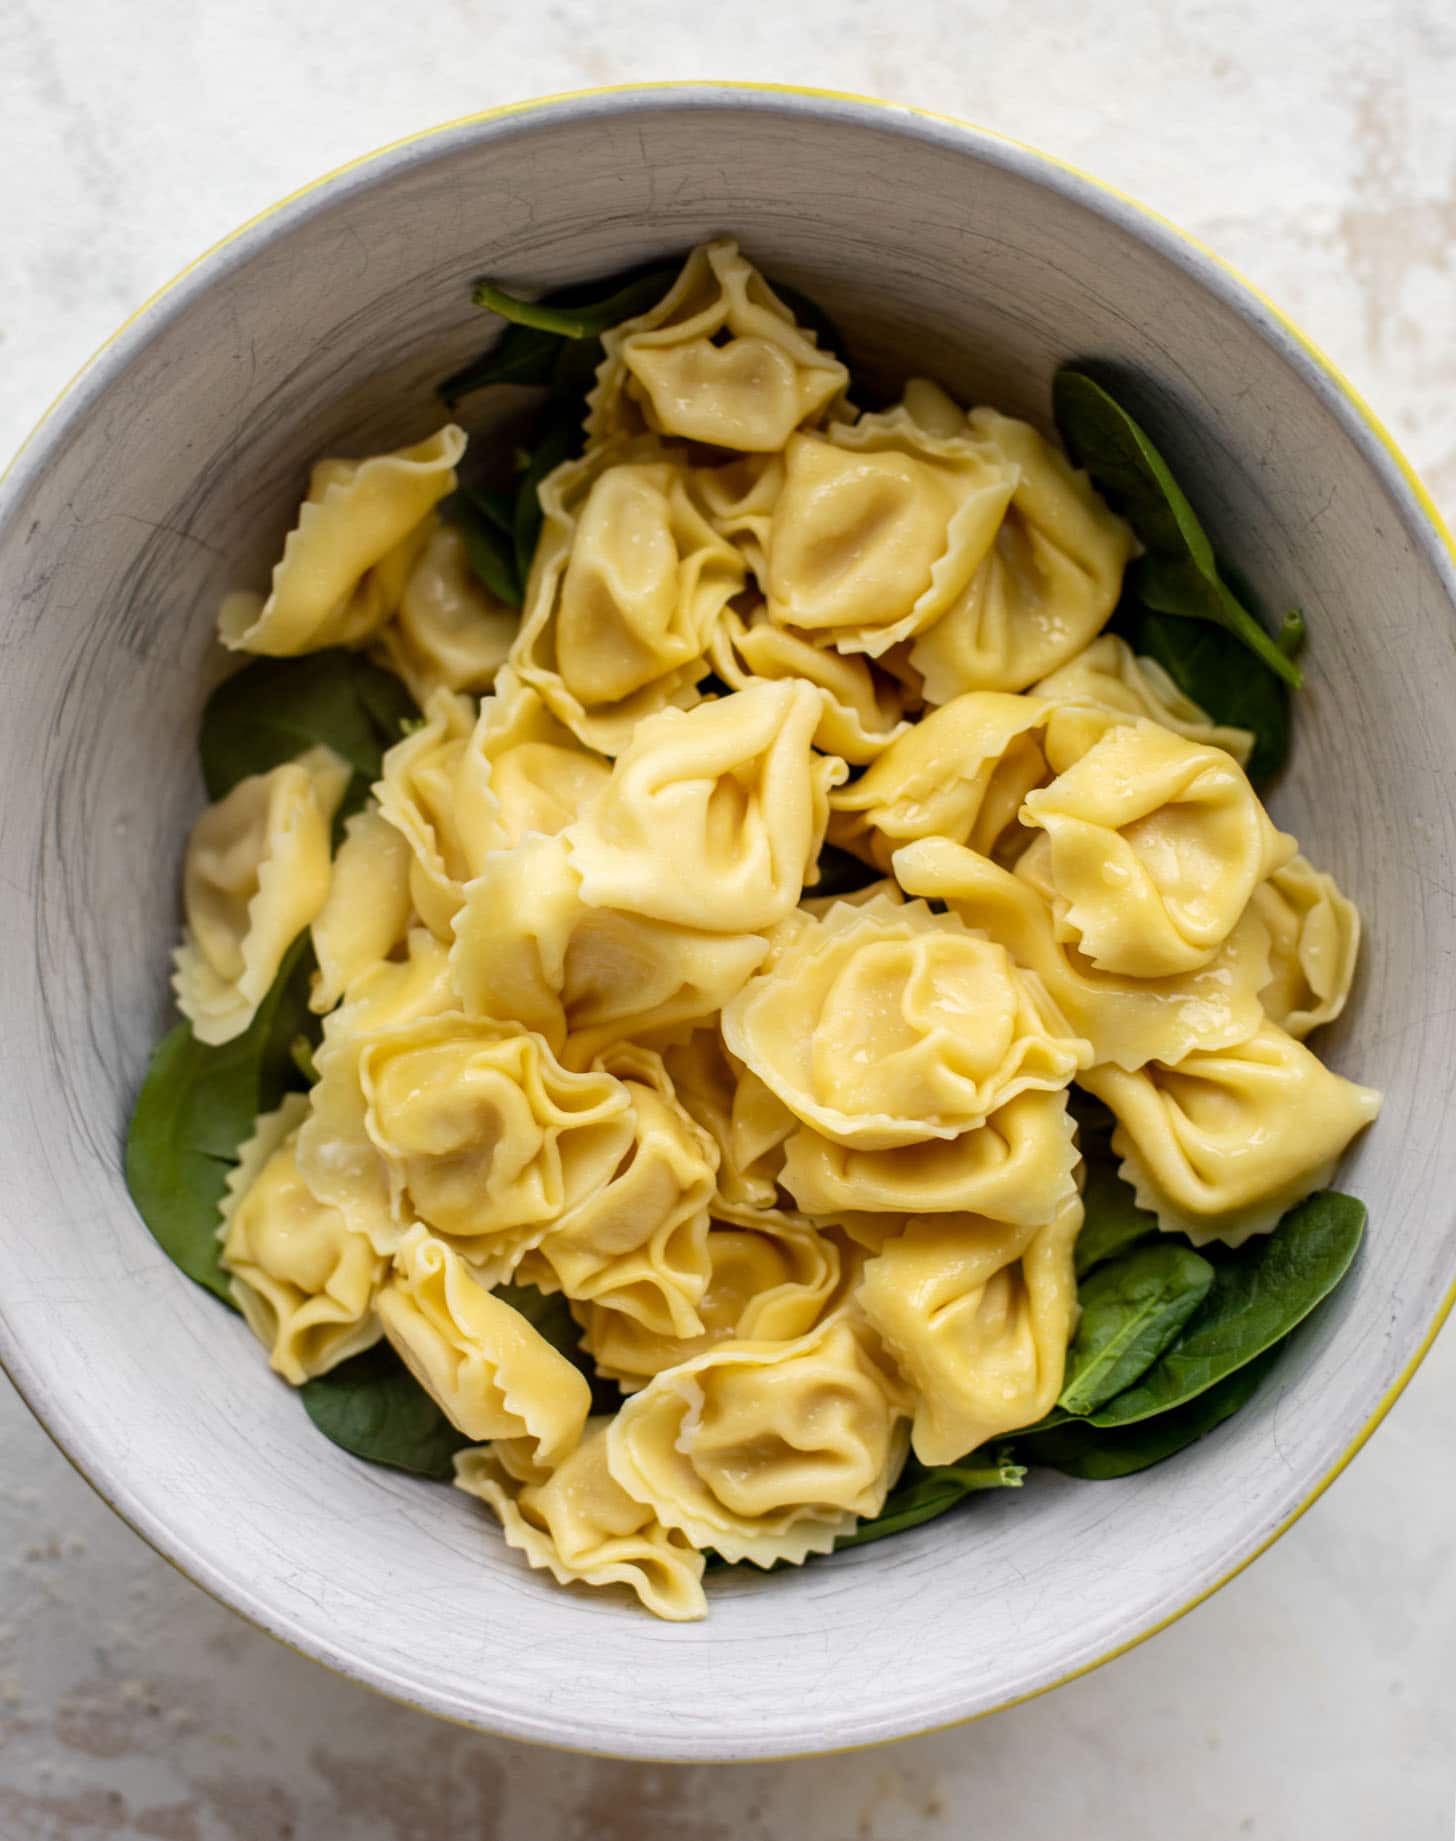 baby spinach and tortellini in a bowl